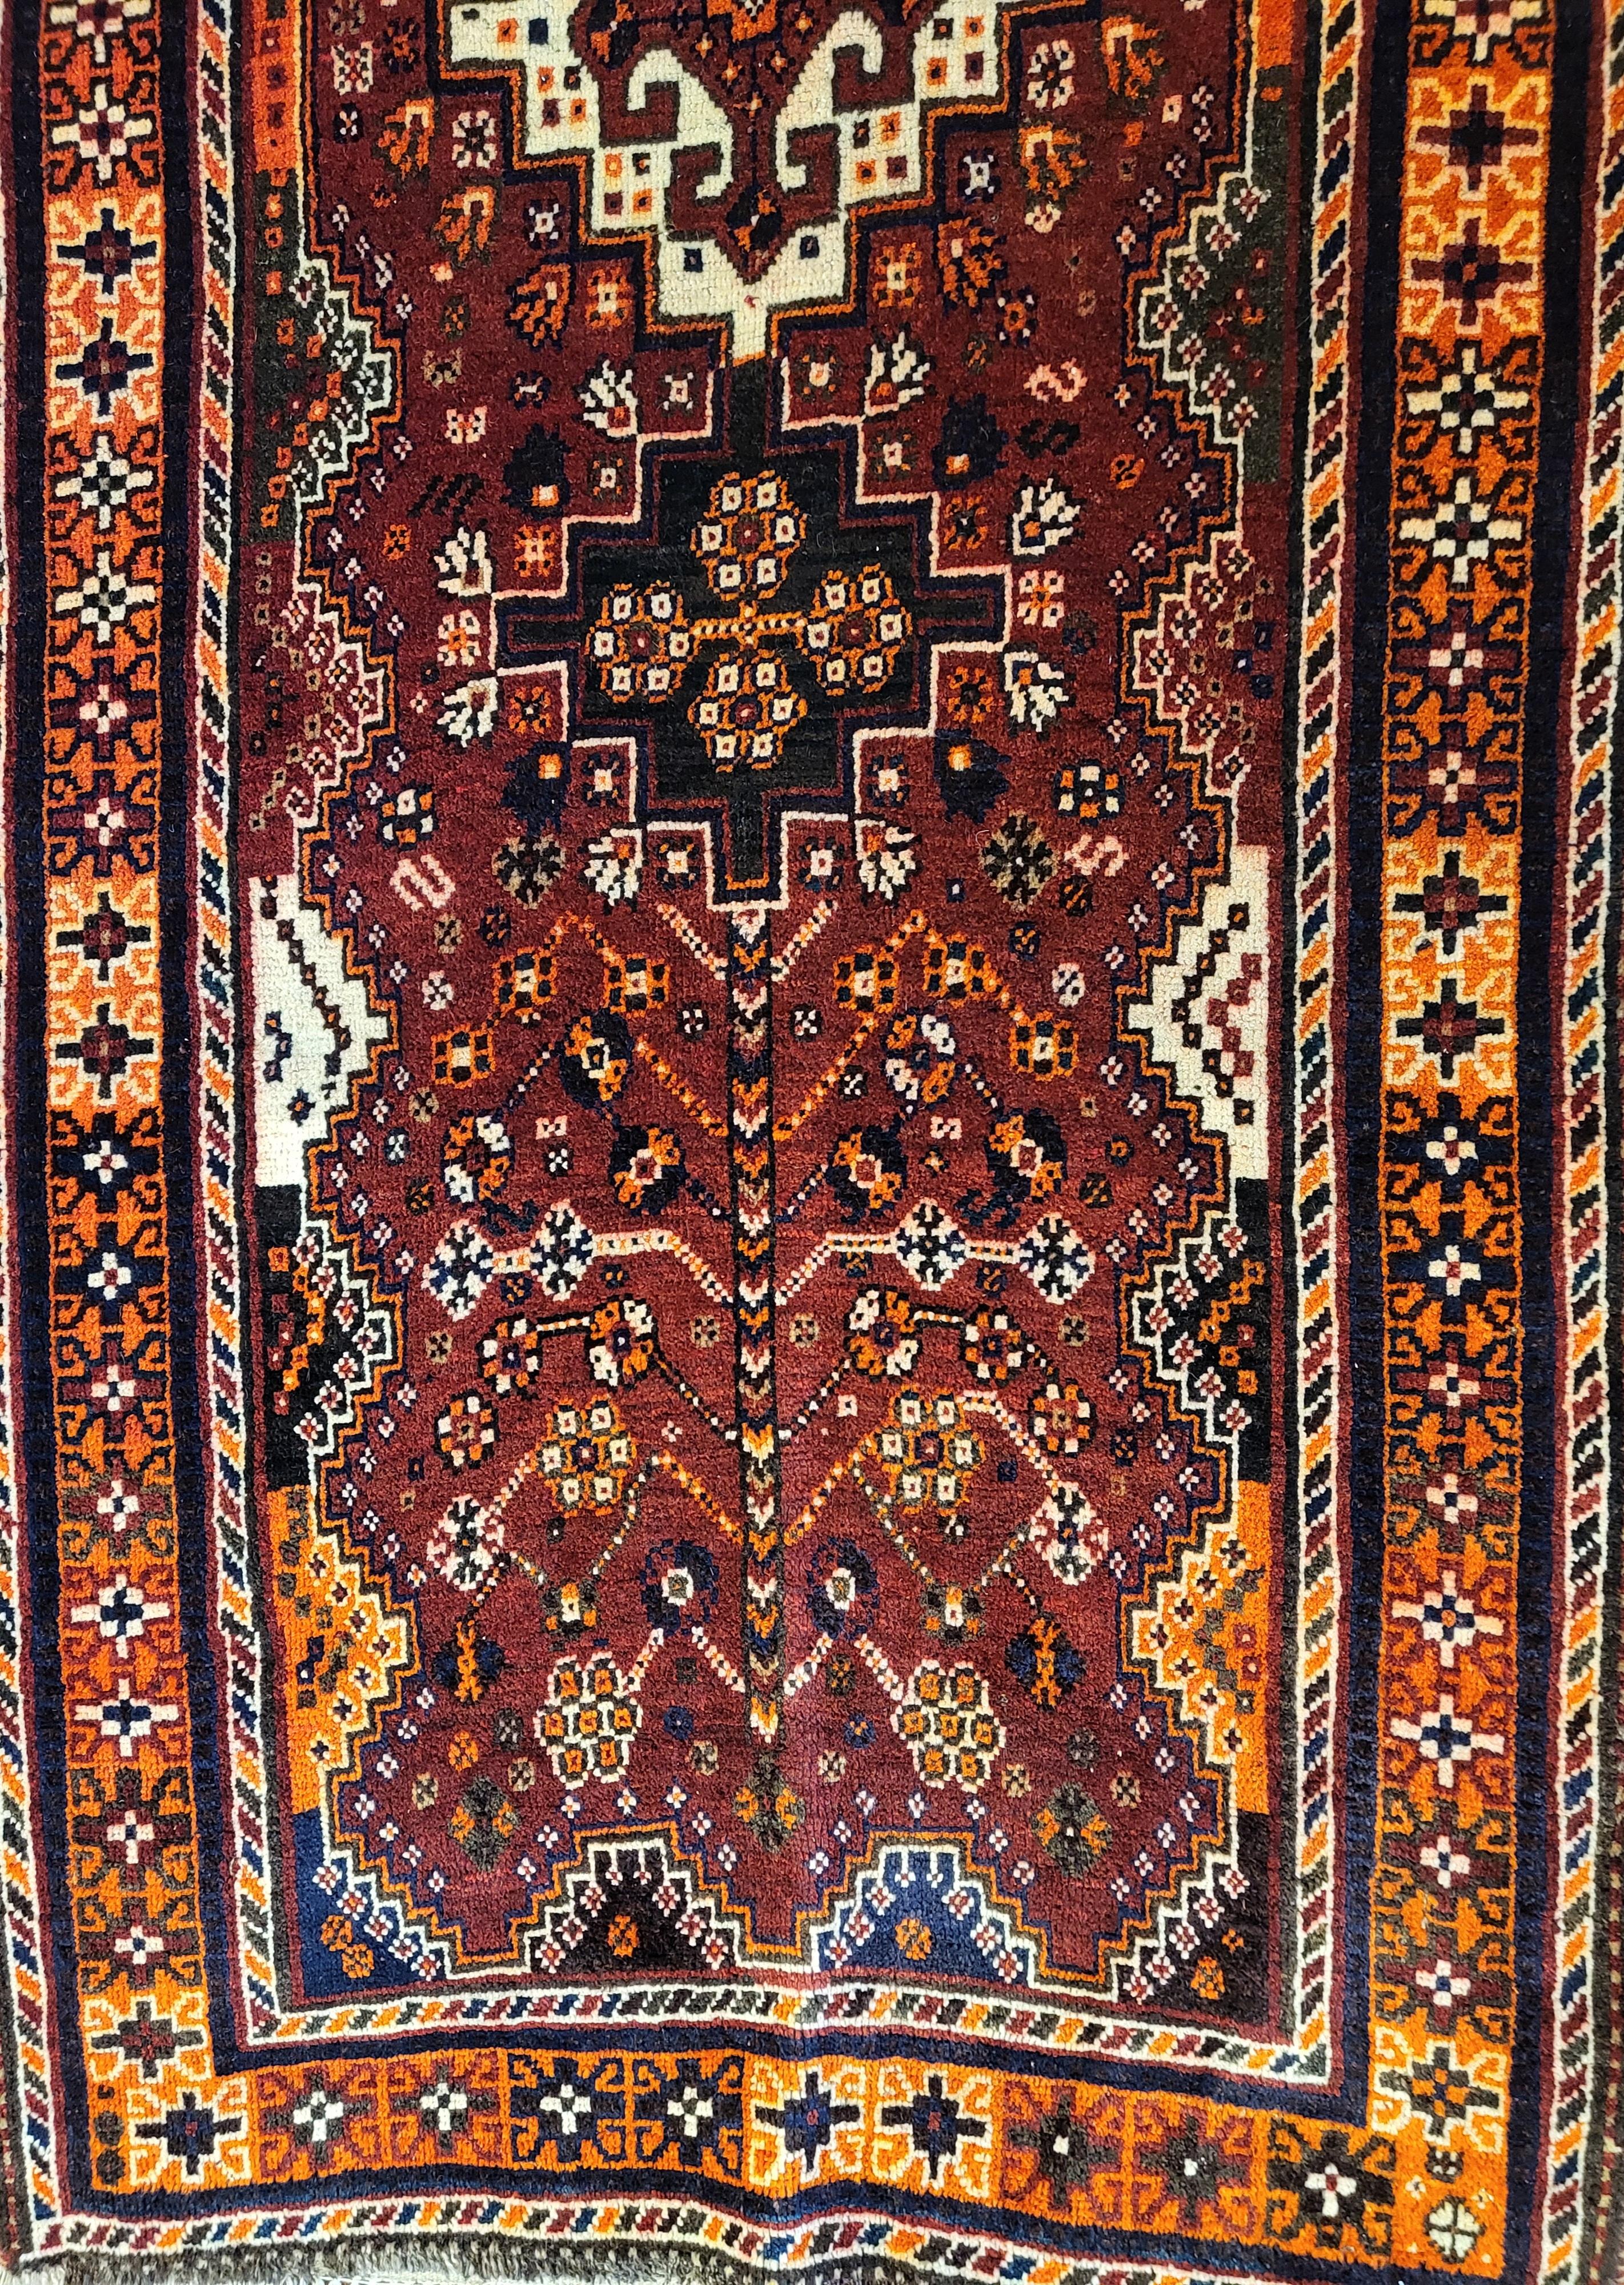 Immaculate Rahimi of the Qashqais
3'3 x 9'3, Rust and Orange Runner

Hand woven entirely of wool raised, sheared, spun, dyed and woven by the nomadic tribal people known as the Rahimis

Known as the kind people. The Rahimis are a very talented